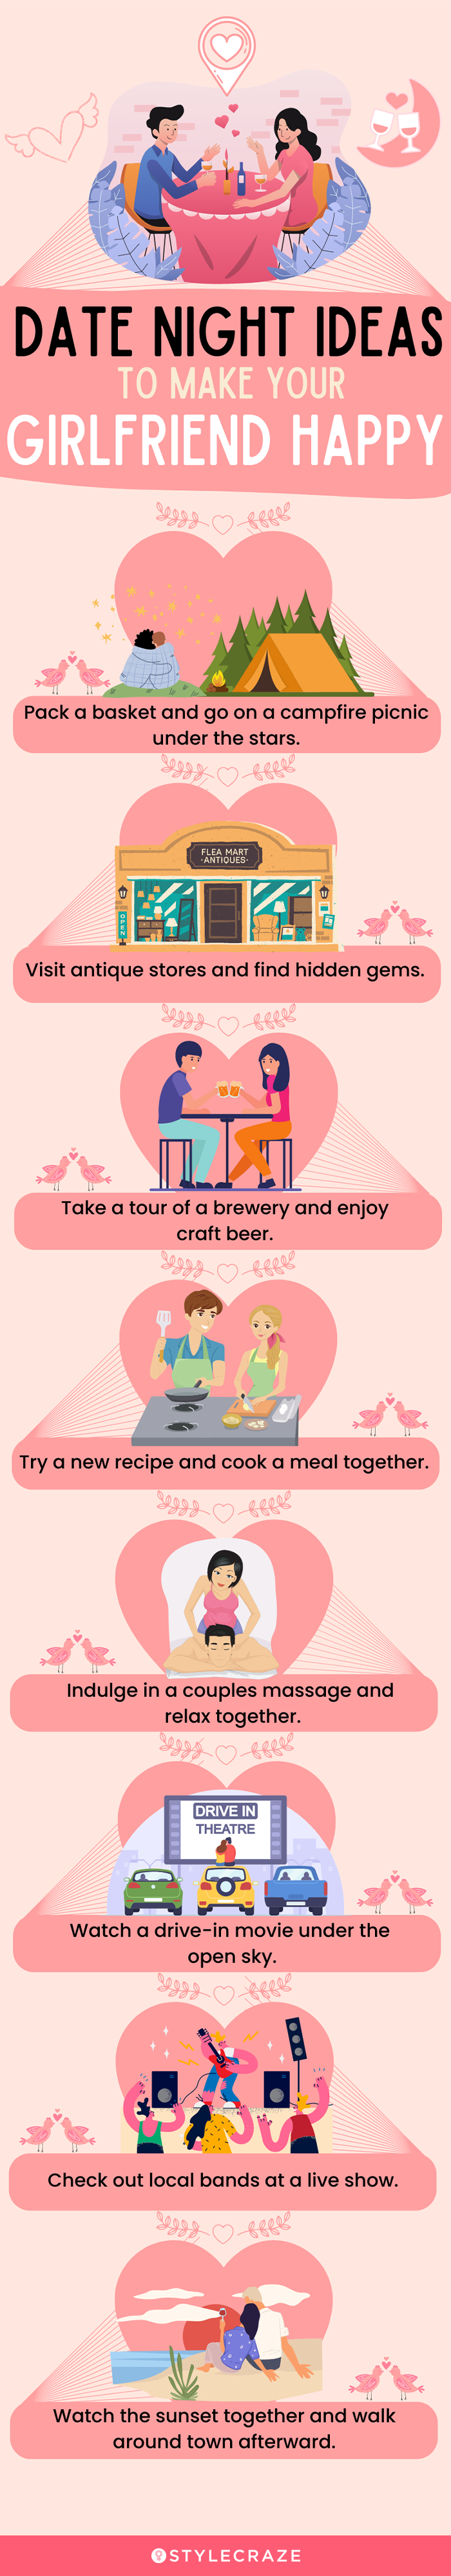 date night ideas to make your girlfriend happy (infographic)